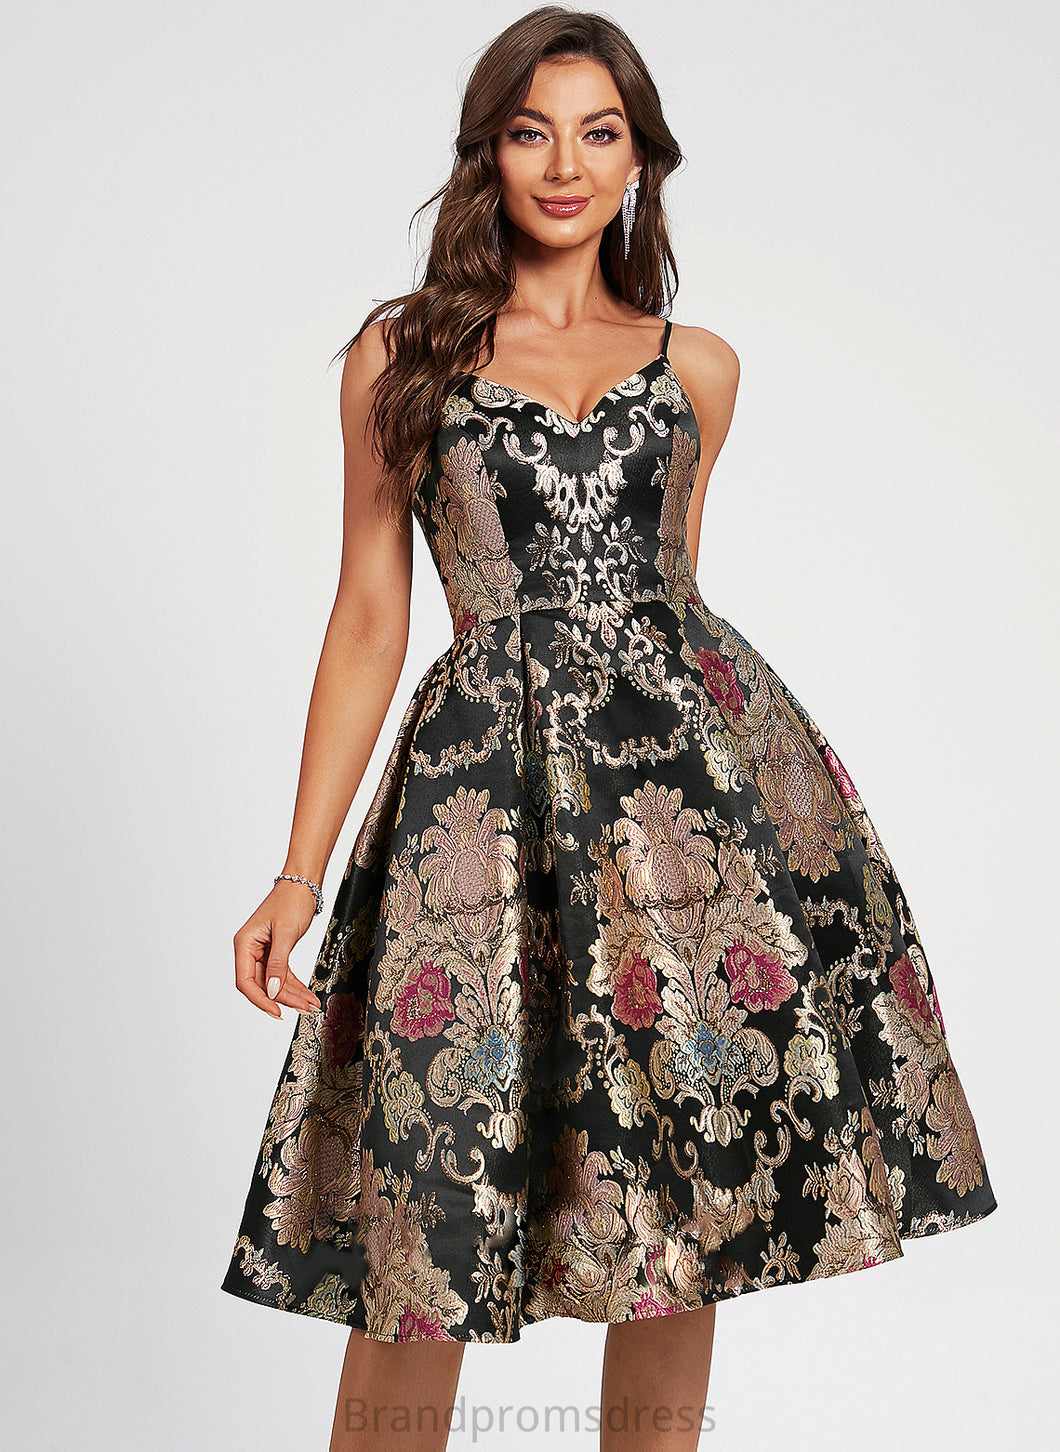 With Homecoming Dresses V-neck A-Line Homecoming Dress Kaliyah Lace Knee-Length Flower(s)